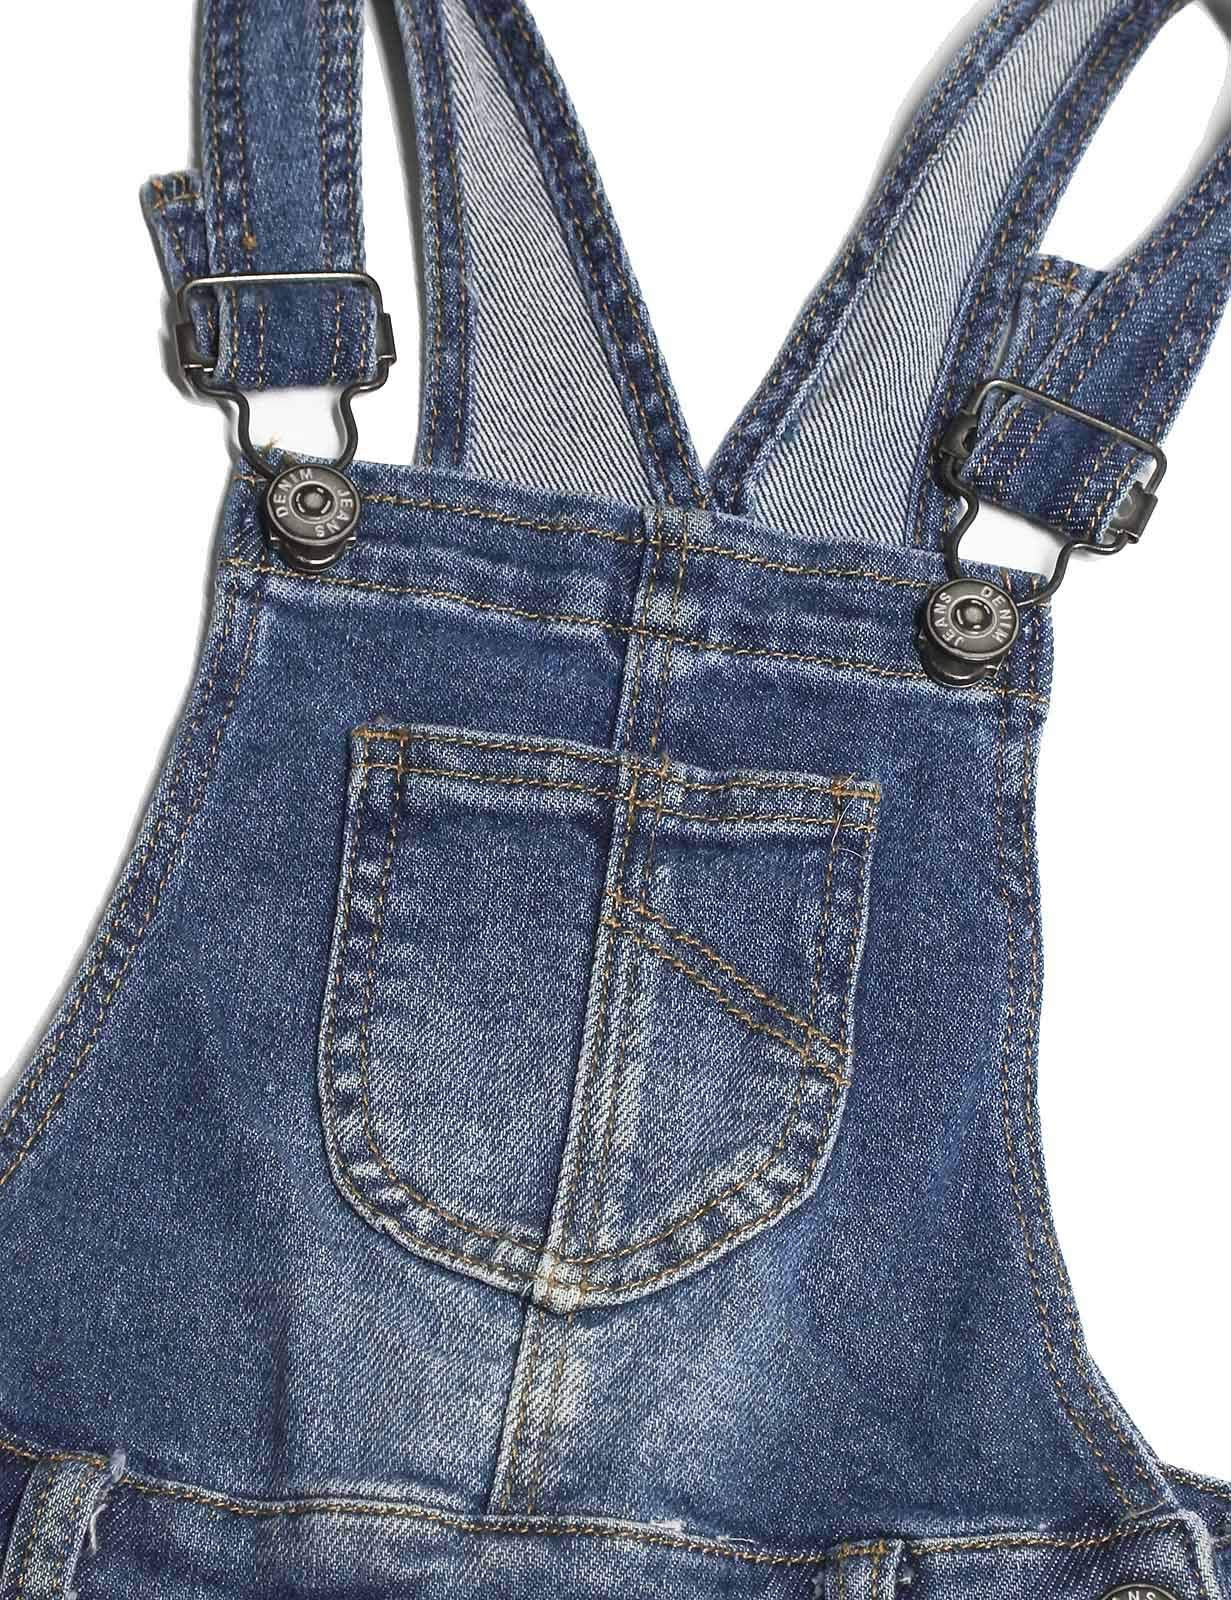 KIDSCOOL SPACE Girls Boys Denim Ripped Overalls,Washed Distressed Cotton Jean Pants